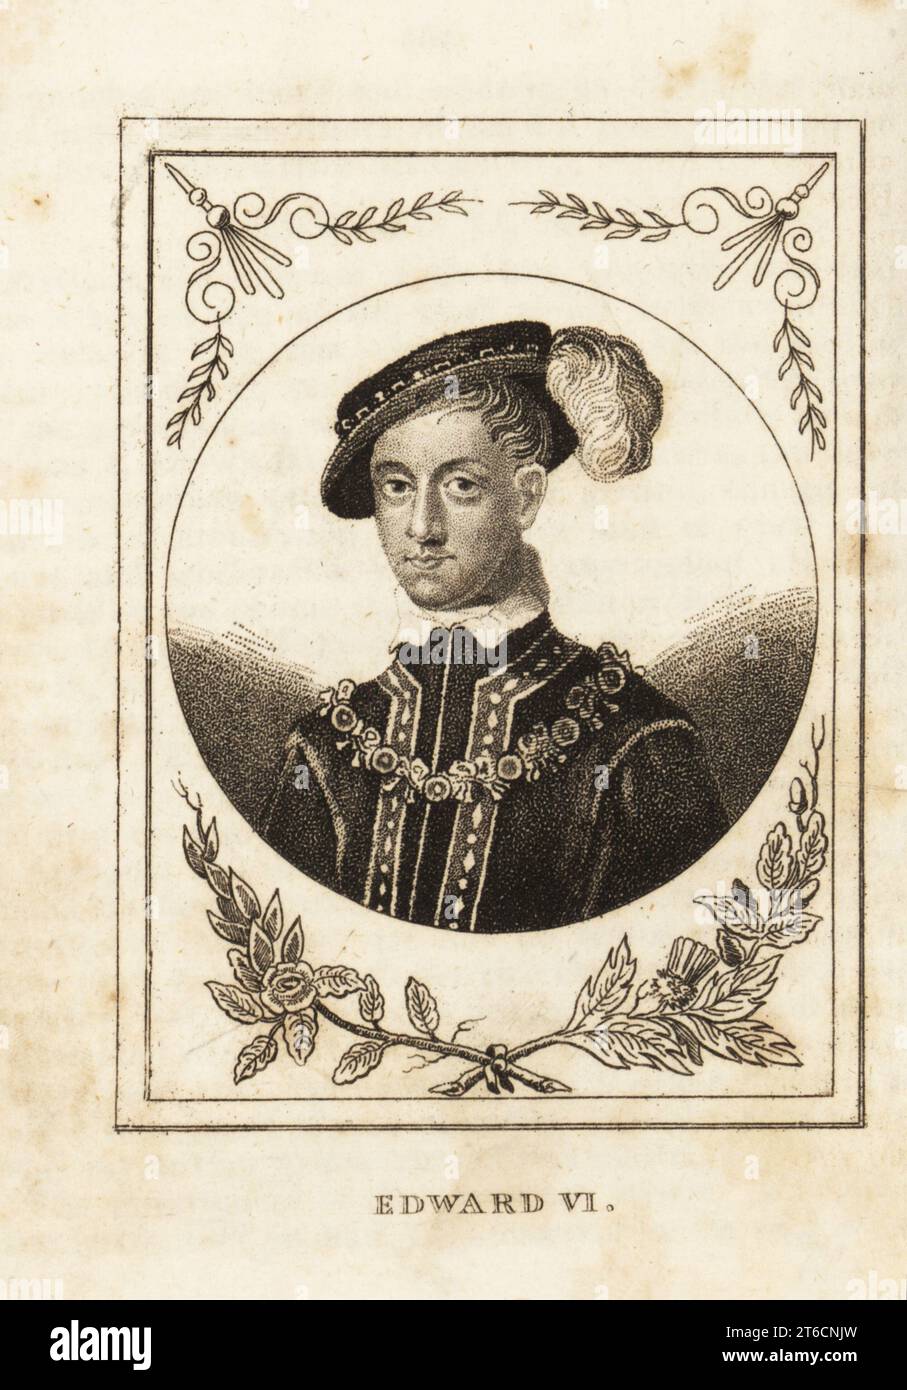 Portrait of King Edward VI of England, 1537-1553. Copperplate engraving from M. A. Jones History of England from Julius Caesar to George IV, G. Virtue, 26 Ivy Lane, London, 1836. Stock Photo